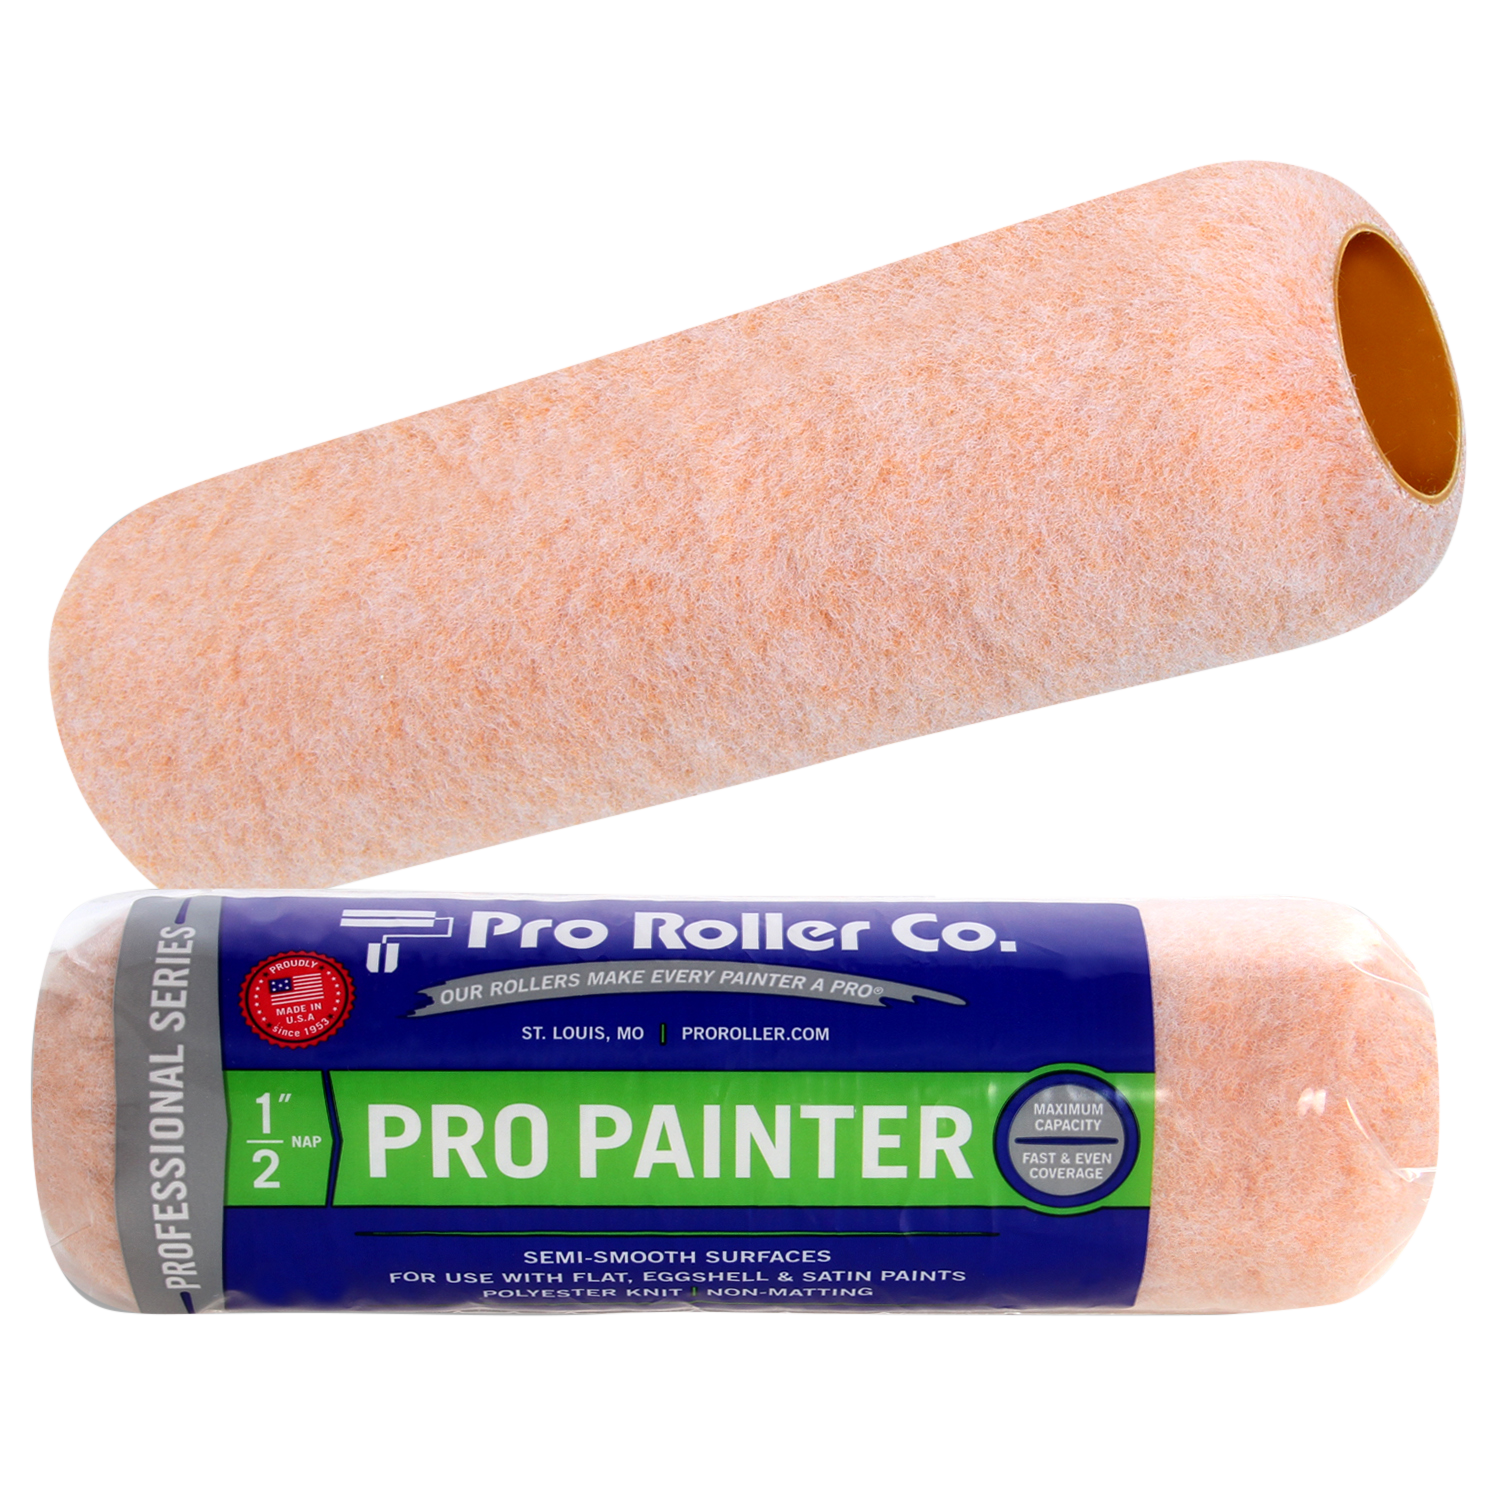 Buy Special roller to paint FLOORS, for fine finishes. Maximum coverage and  hardness to solvents.